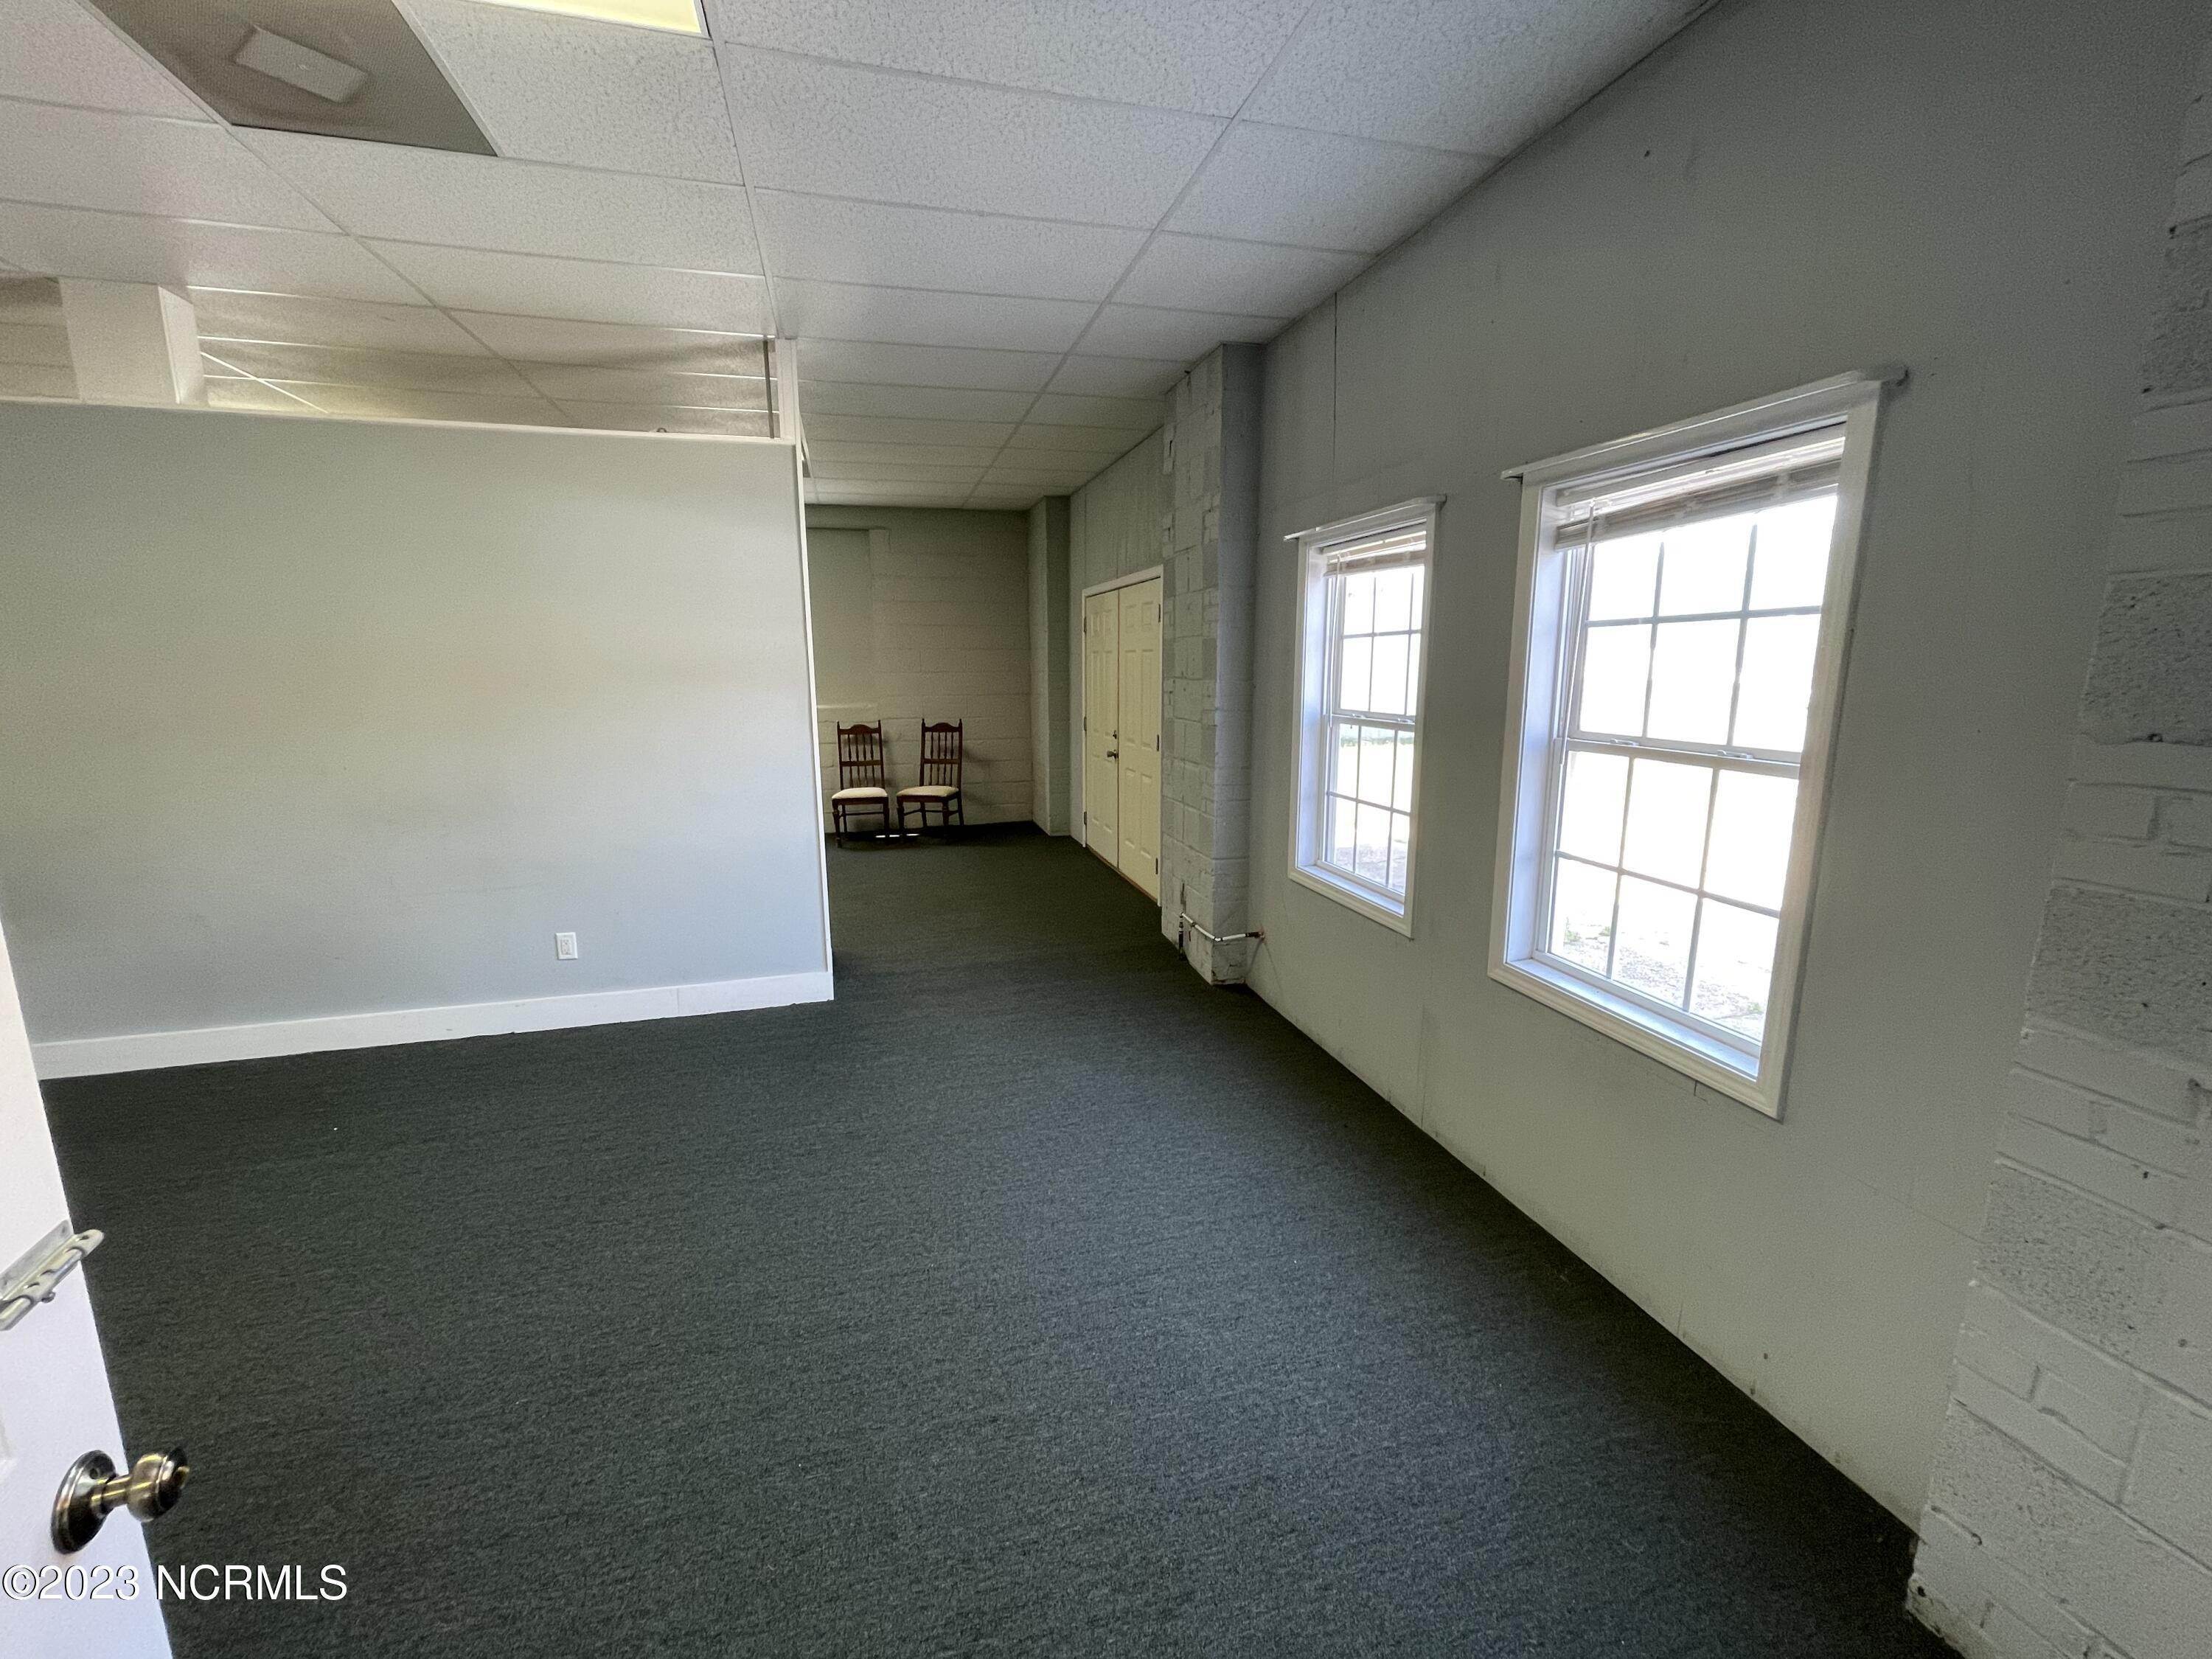 9. Commercial for Sale at 150 Main Street Star, North Carolina 27356 United States